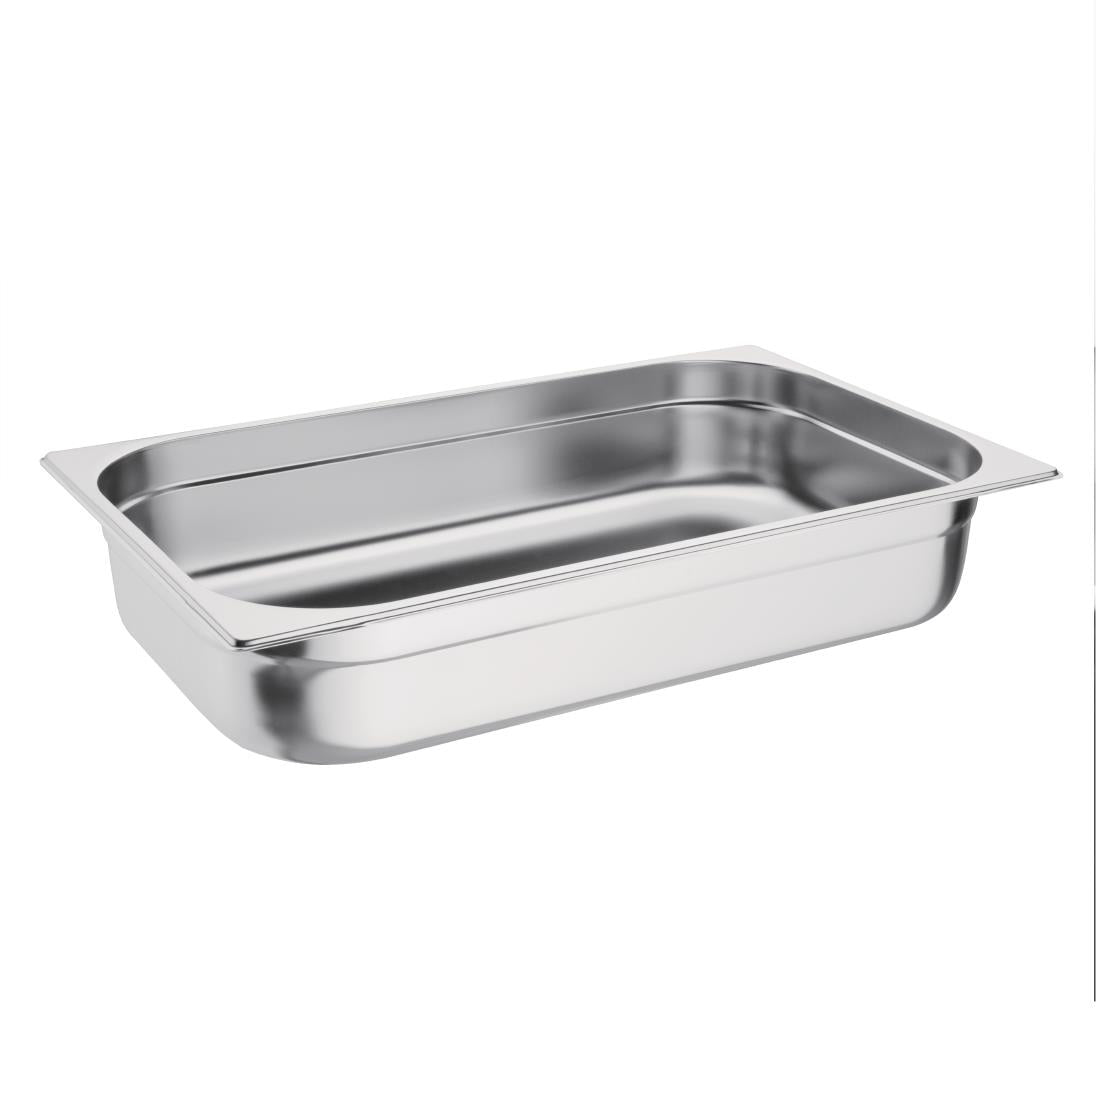 K923 Vogue Stainless Steel 1/1 Gastronorm Pan 100mm JD Catering Equipment Solutions Ltd